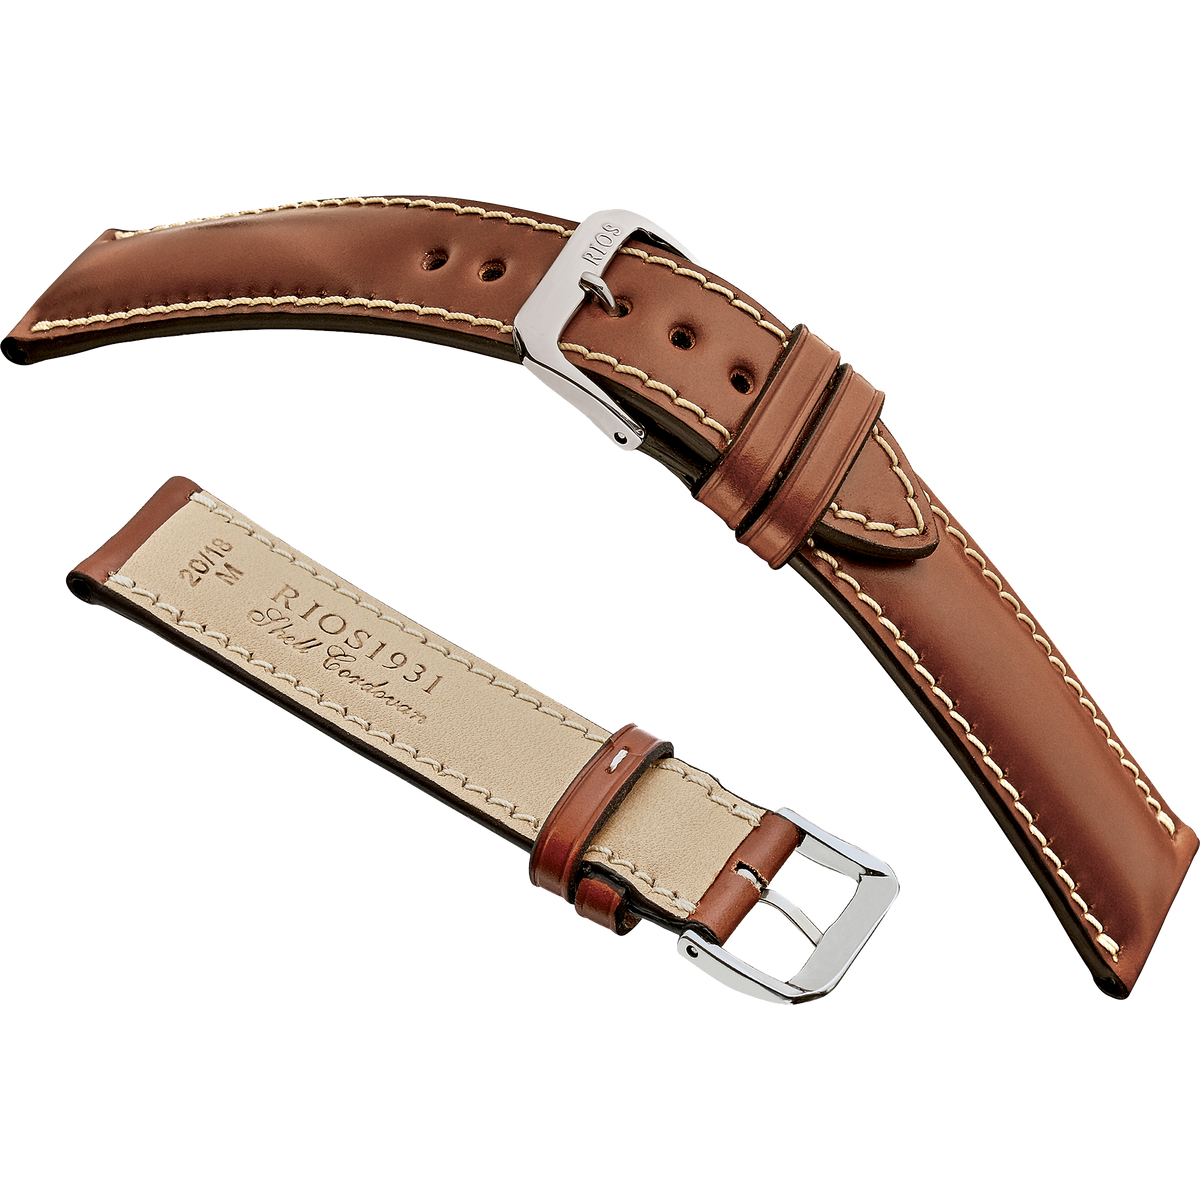 Rios 1931 Watch Bands - New York - Genuine Shell Cordovan Leather